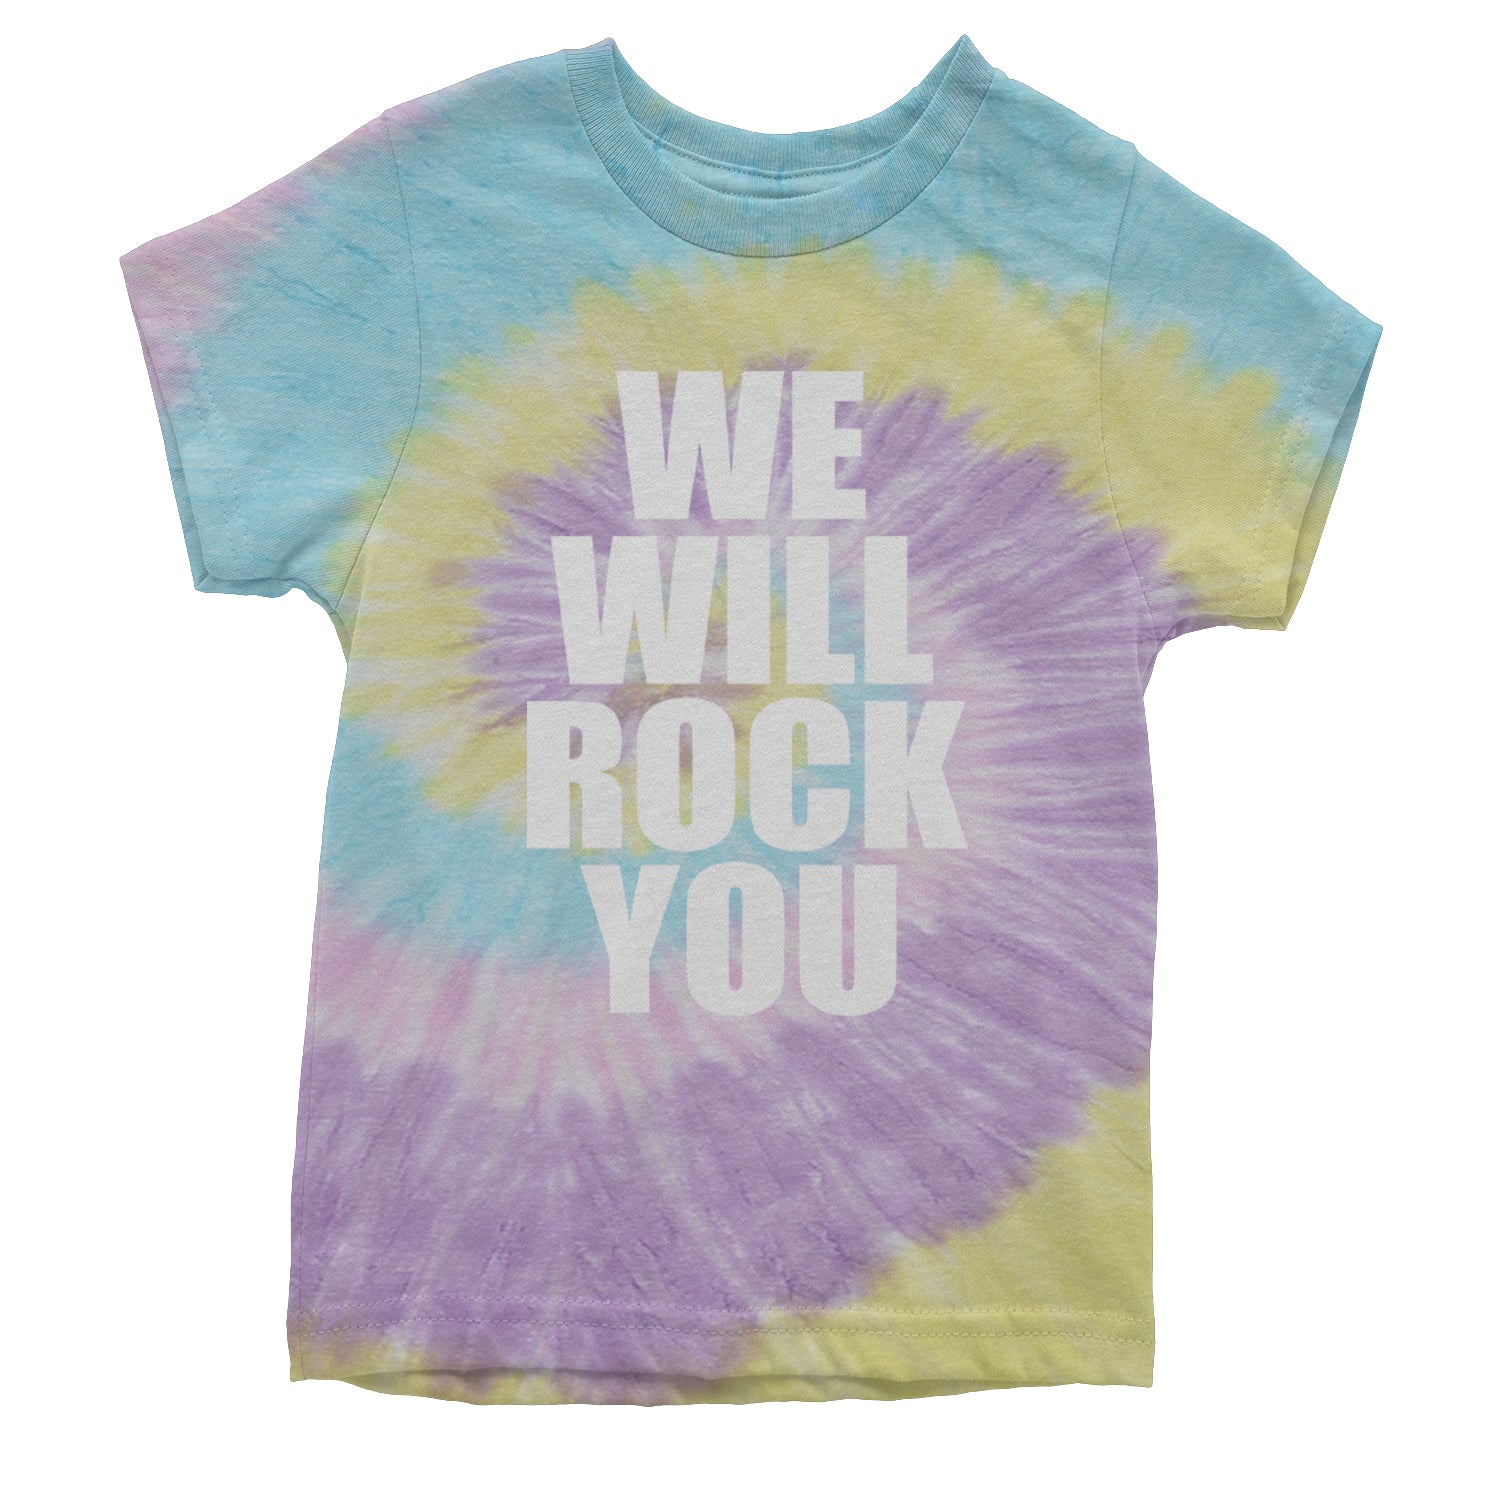 We Will Rock You Youth T-shirt #expressiontees by Expression Tees